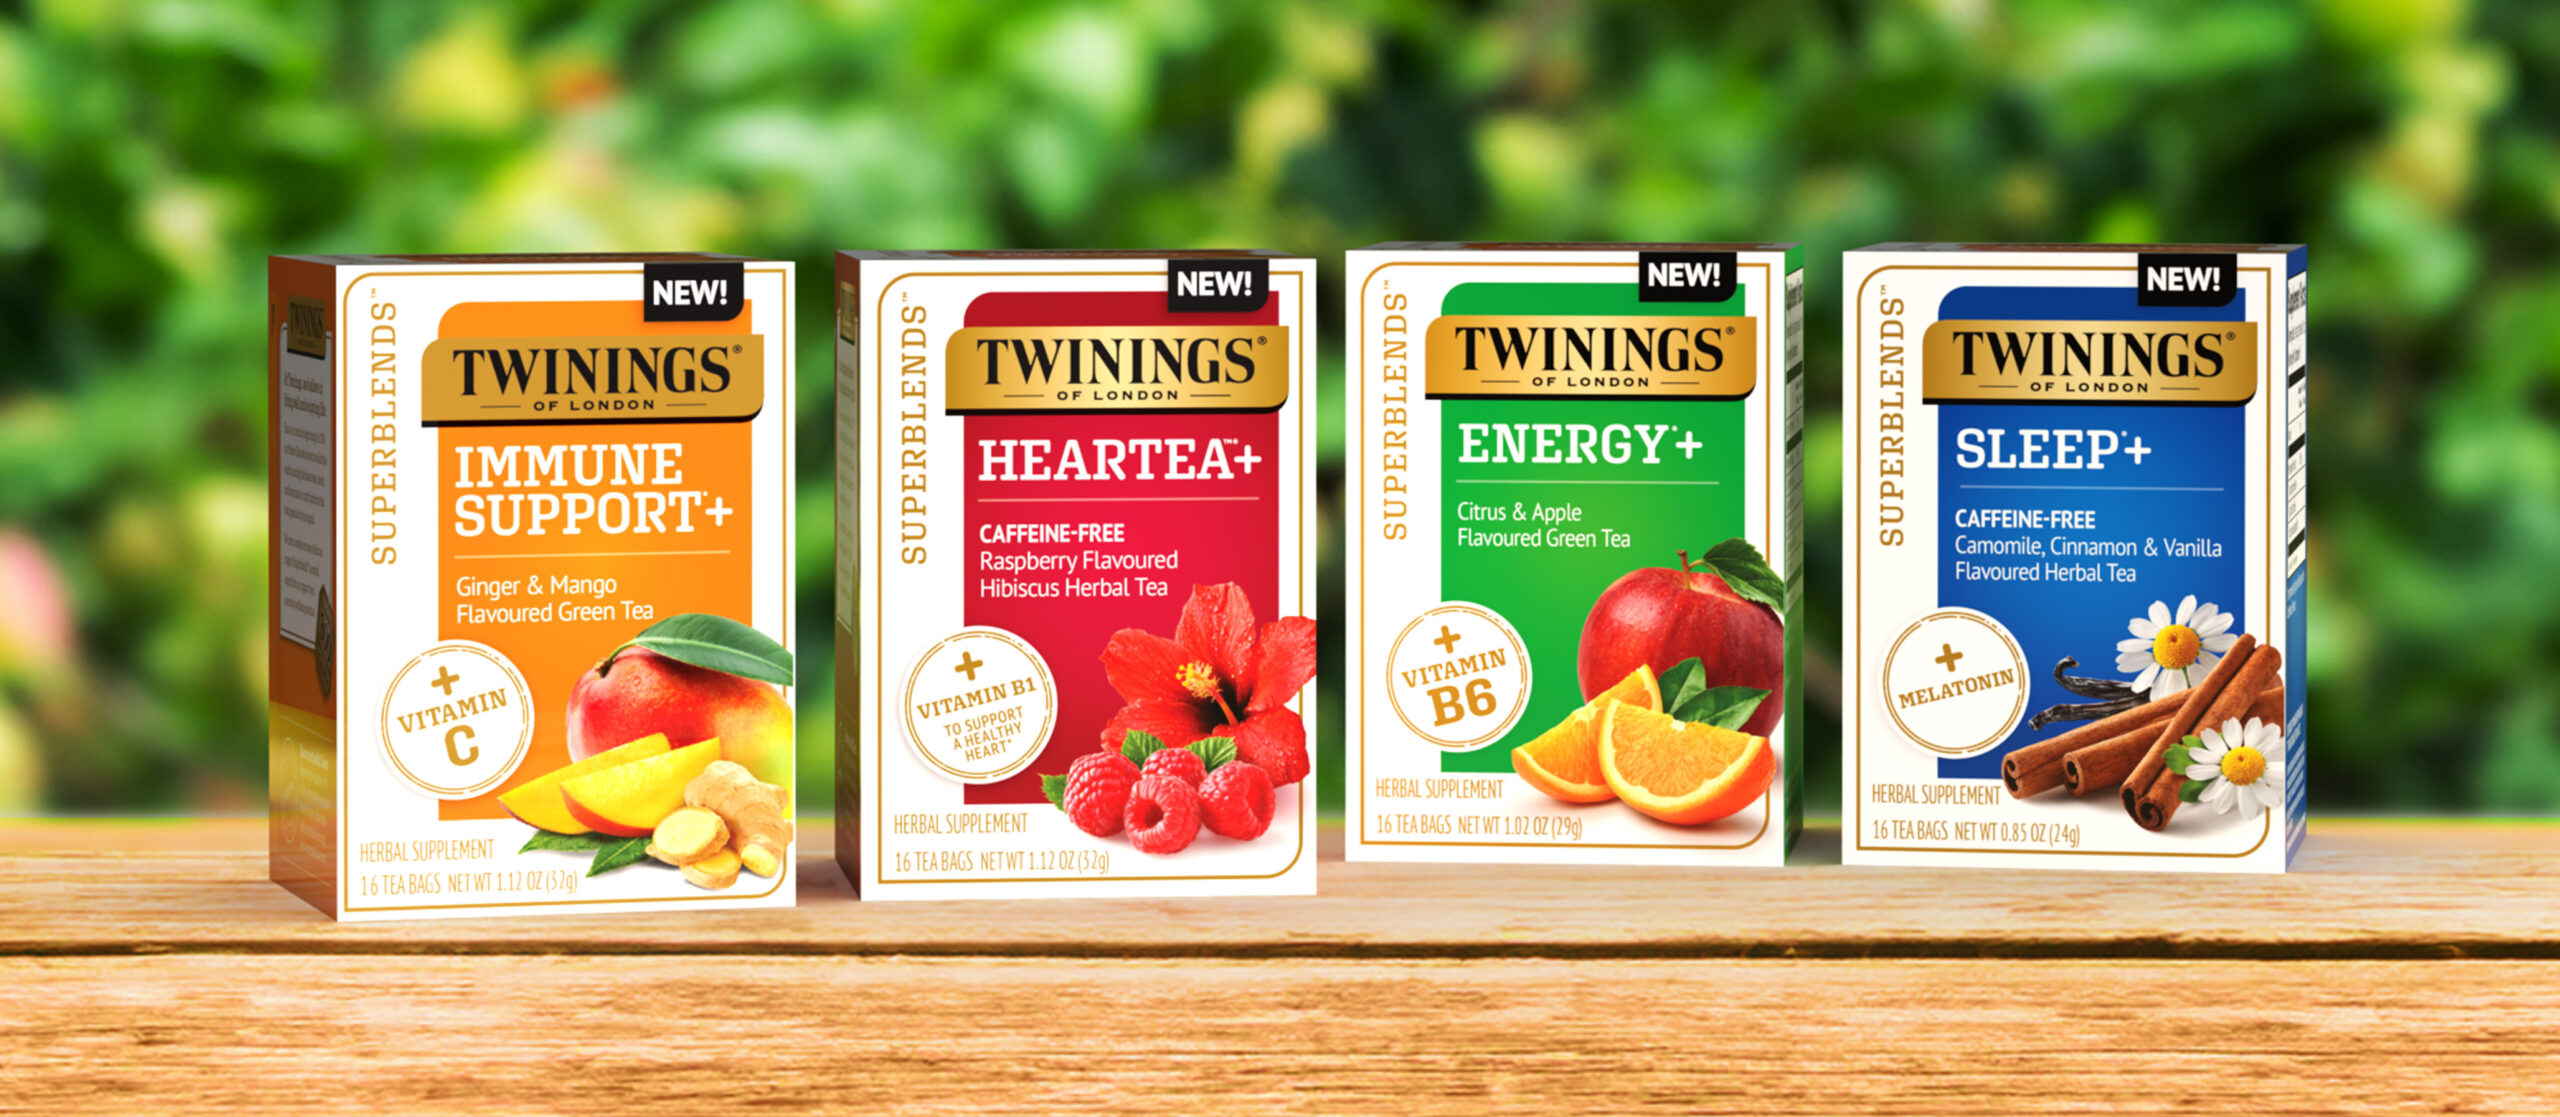 Twinings Superblends